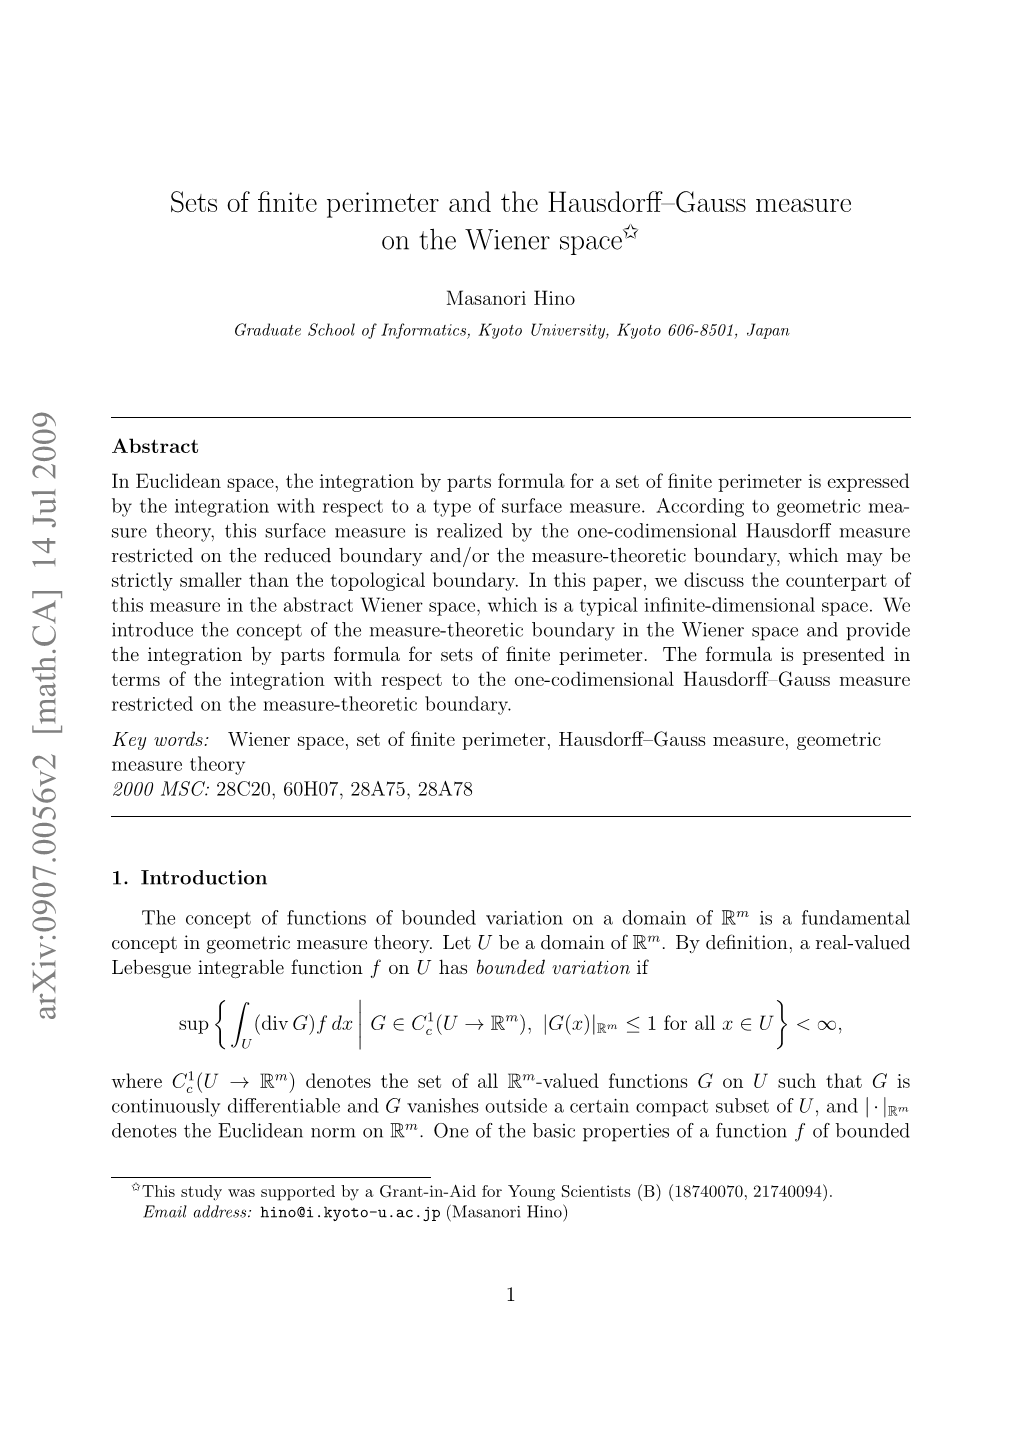 Sets of Finite Perimeter and the Hausdorff-Gauss Measure on The